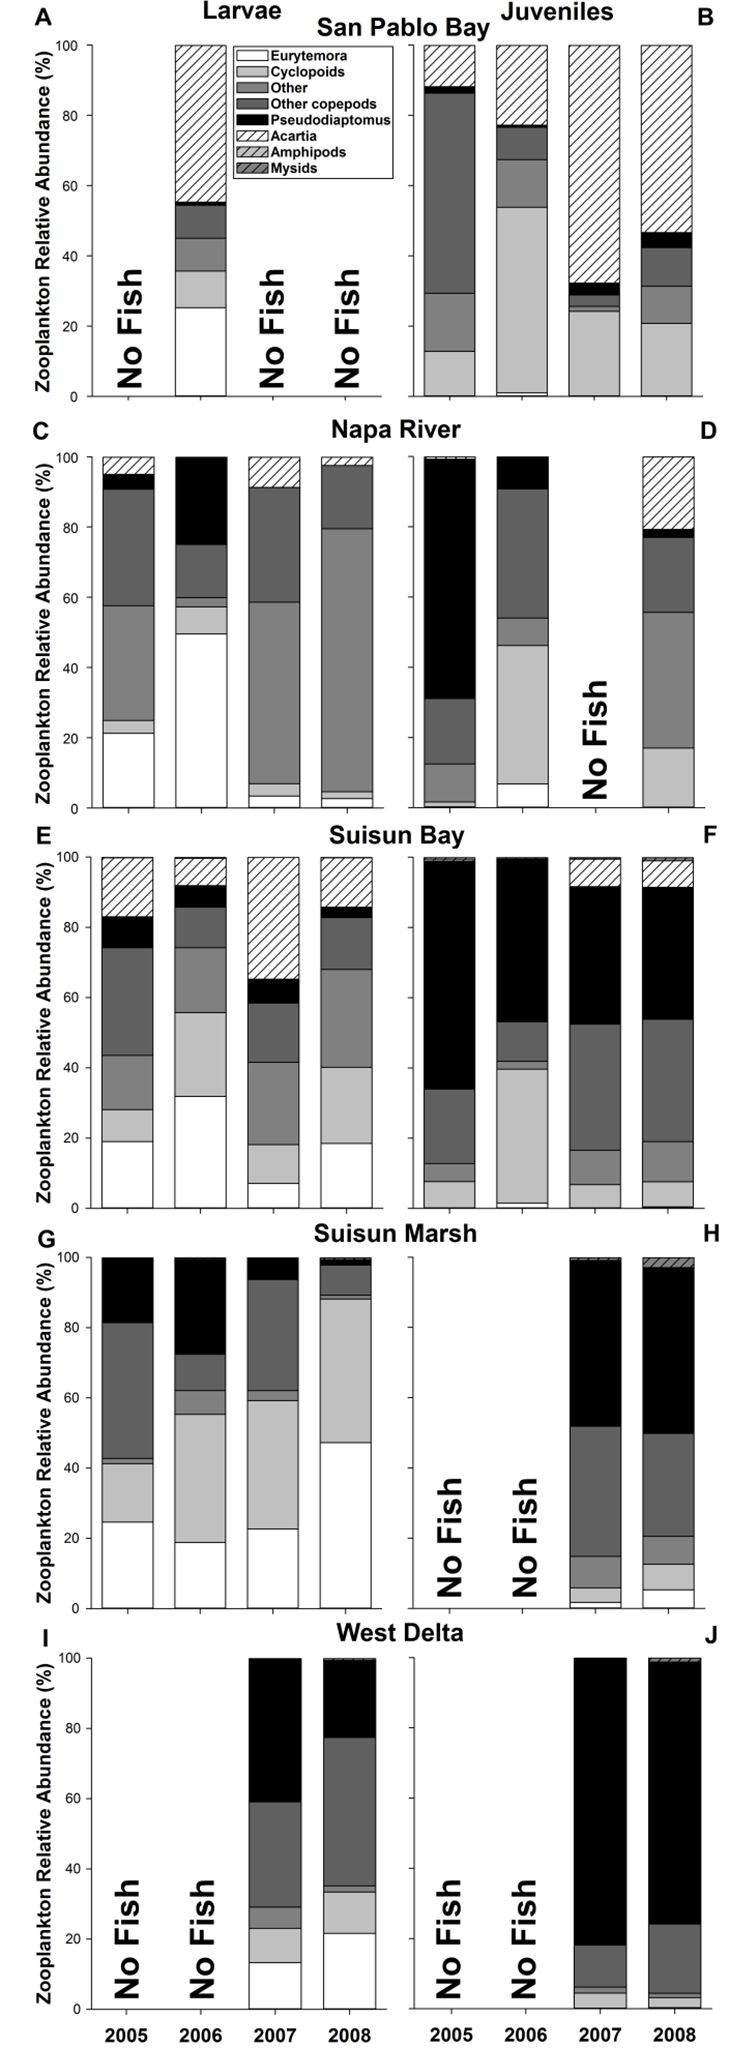 Zooplankton relative abundance (%) available for larval (left panels) and young juvenile (right panels) Longfin Smelt by year for San Pablo Bay (A, B), Napa River (C, D), Suisun Bay (E, F), Suisun Marsh (G, H), and the West Delta (I, J). Note that no mysid or amphipod sampling was conducted in Napa River. No fish were caught in some years and regions, and so no zooplankton data are provided.